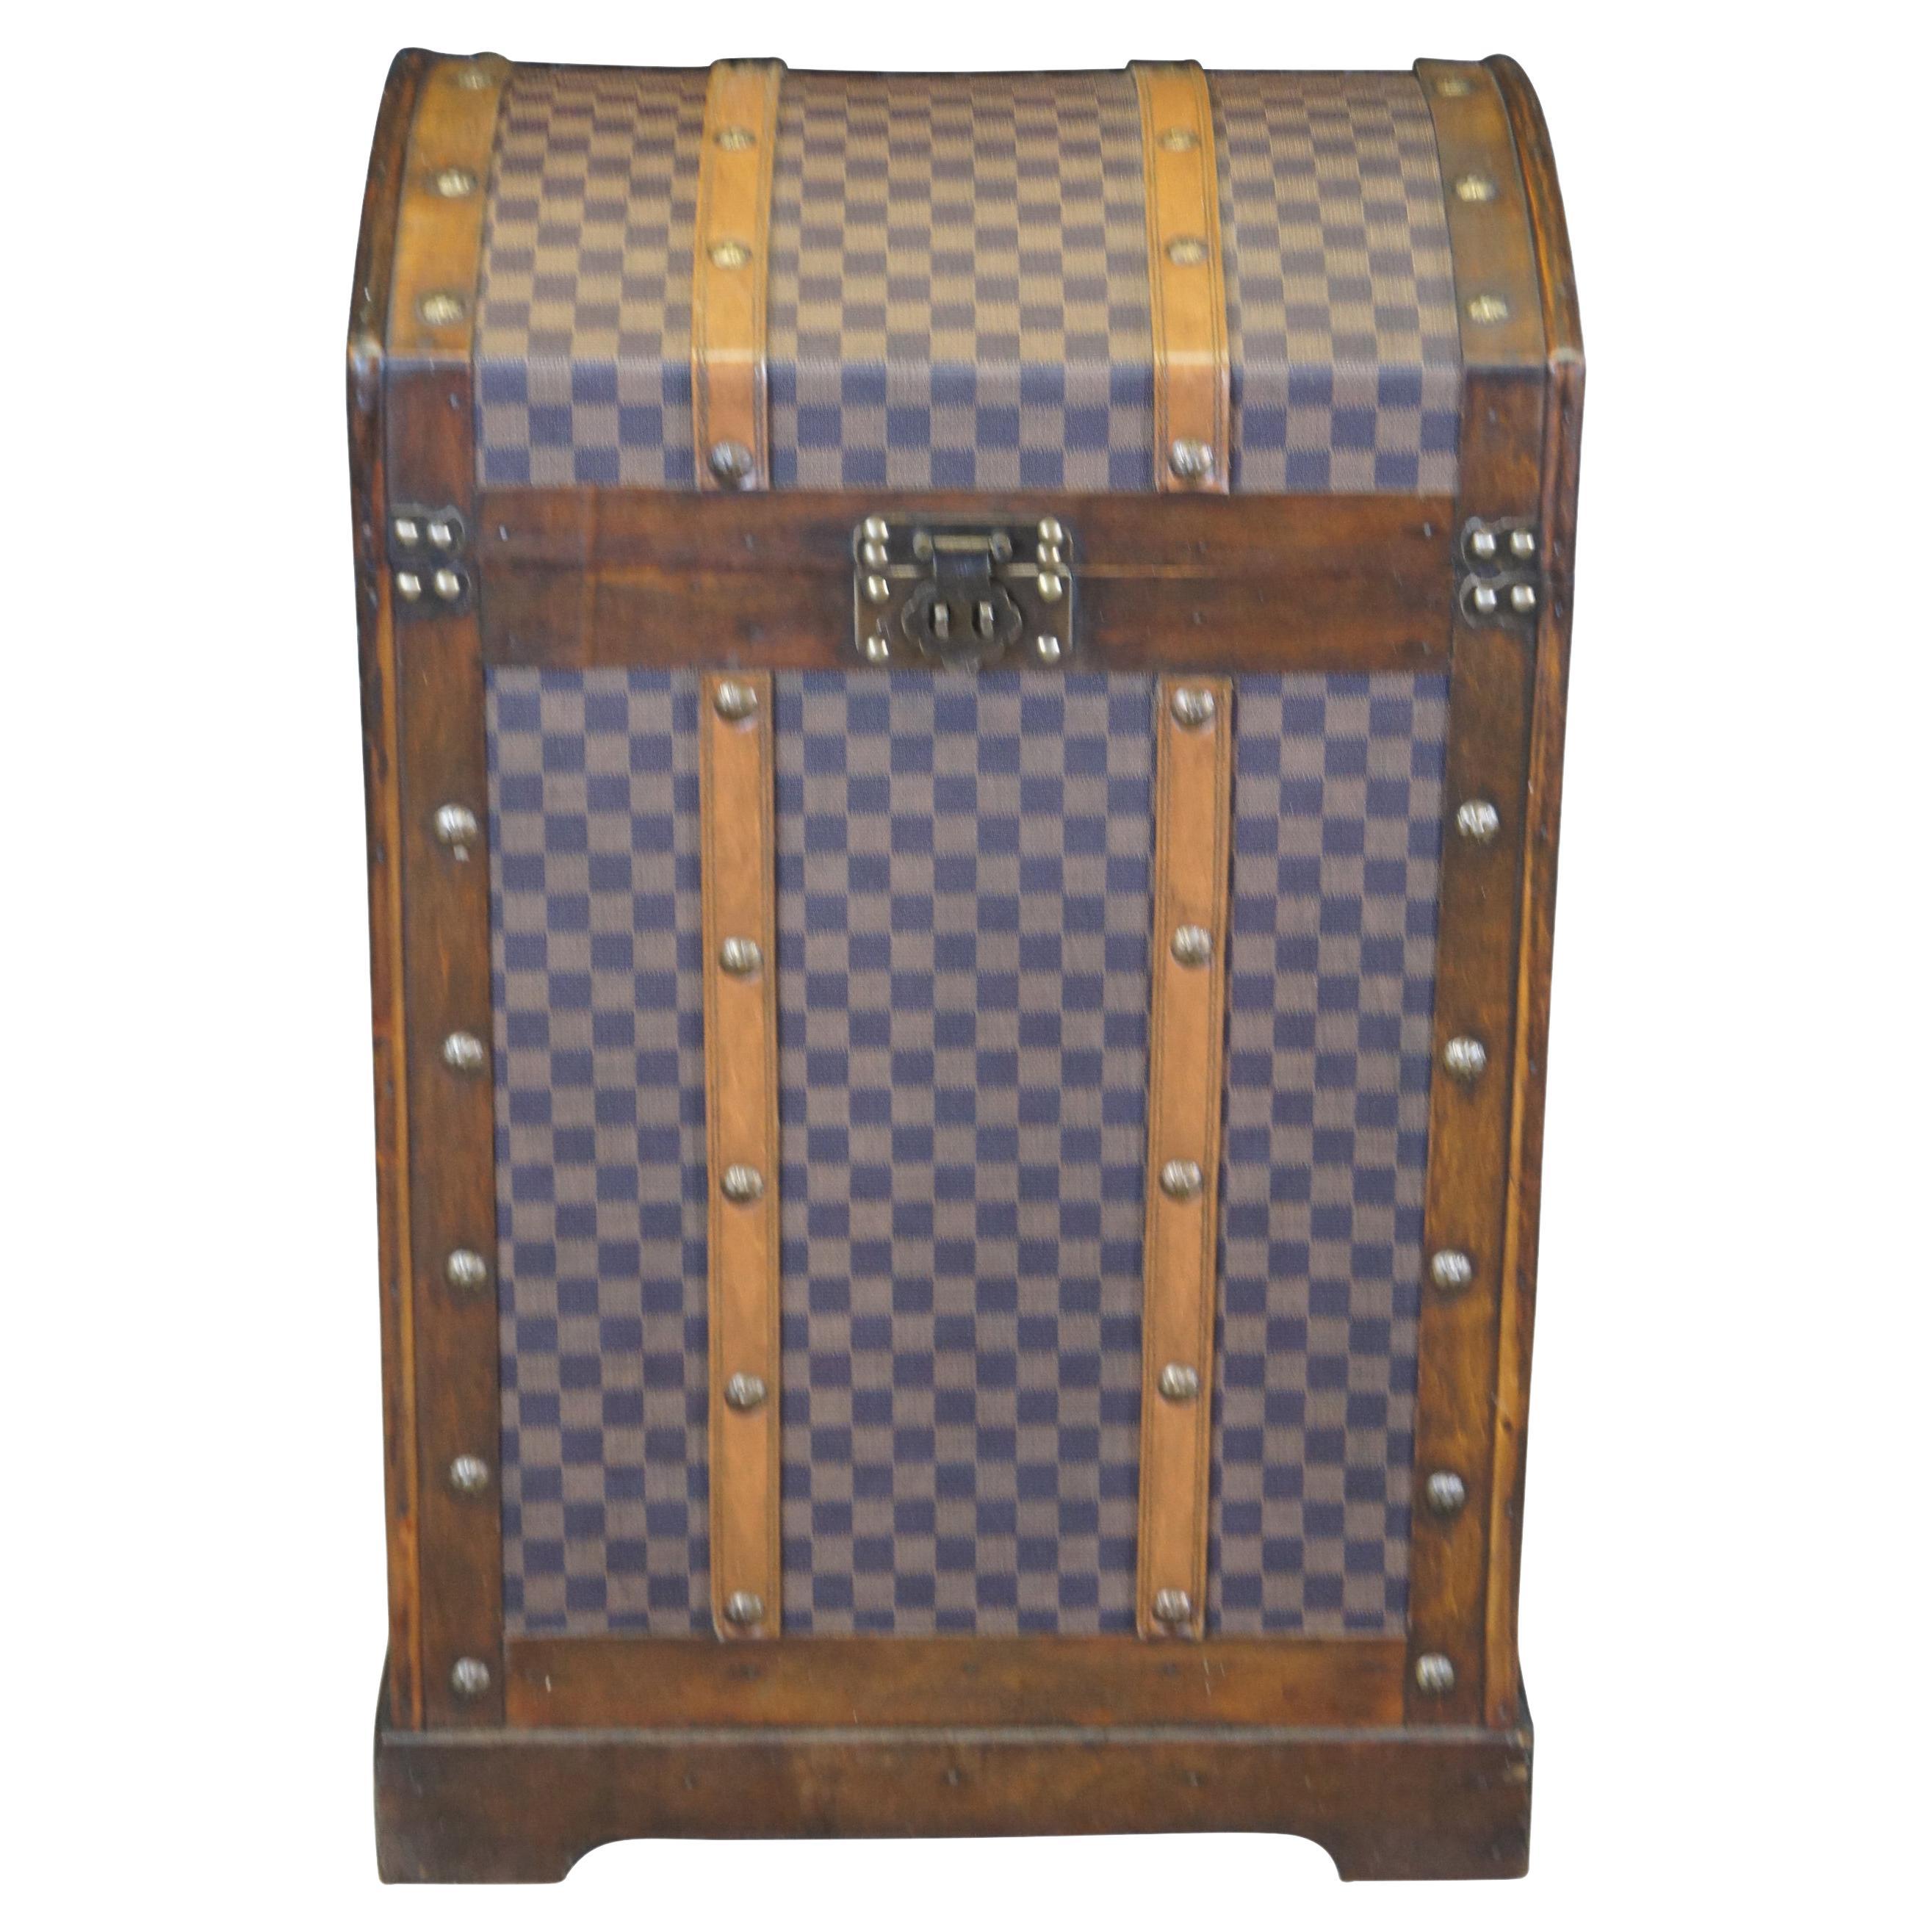 Vtg Louis Vuitton Keepall Bandouliere 45 Malletier LV Monogram Boston Bag  21 For Sale at 1stDibs